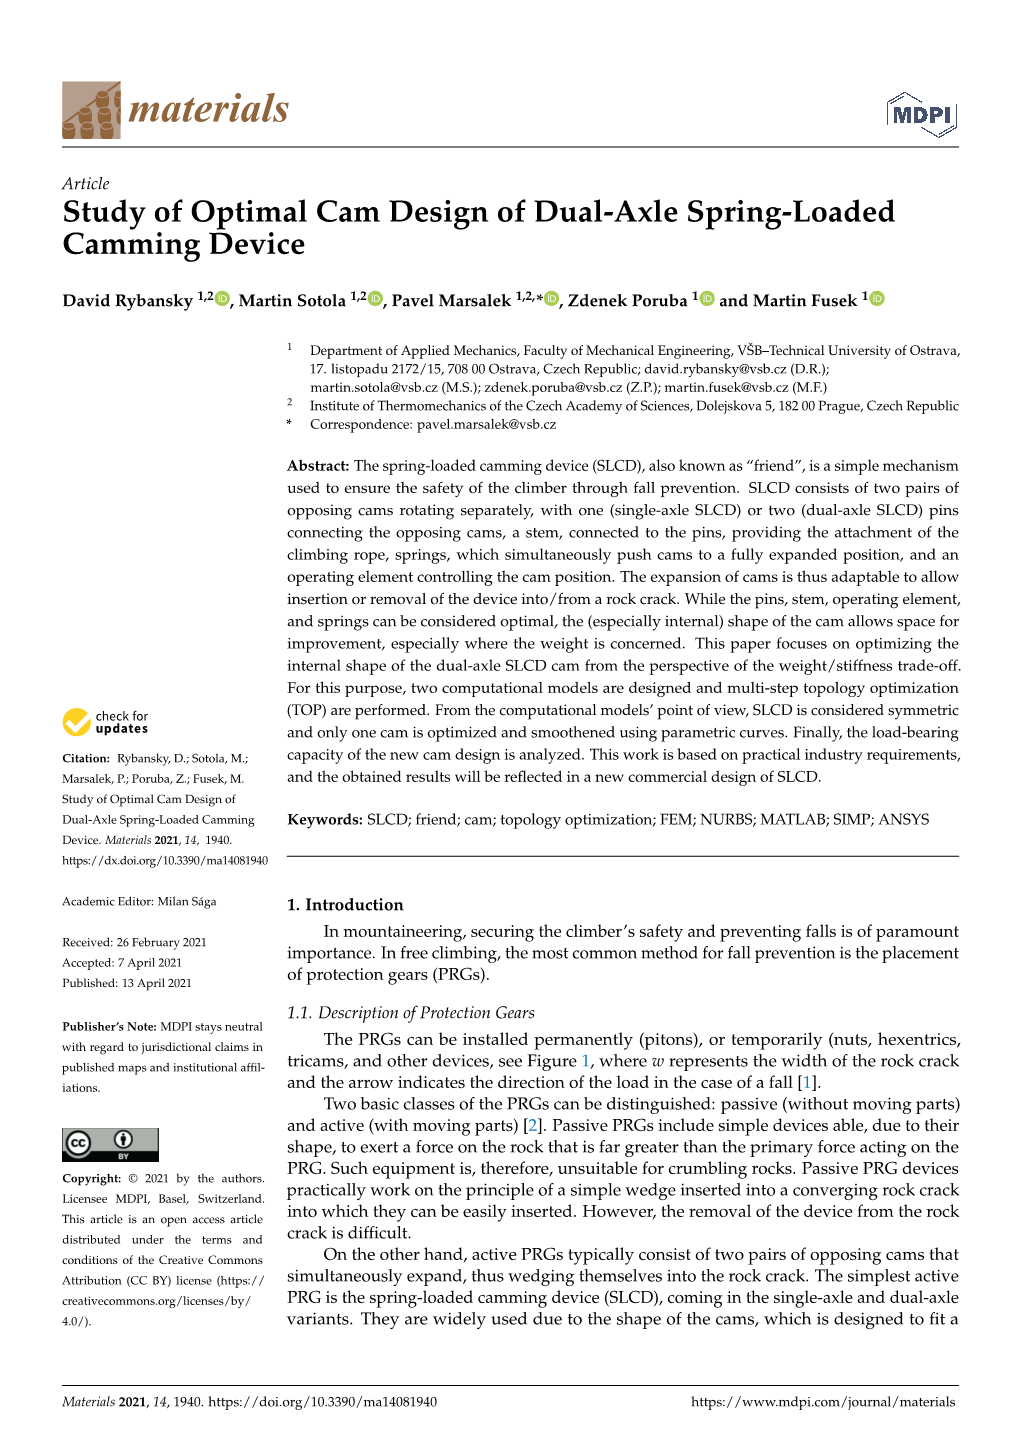 Study of Optimal Cam Design of Dual-Axle Spring-Loaded Camming Device